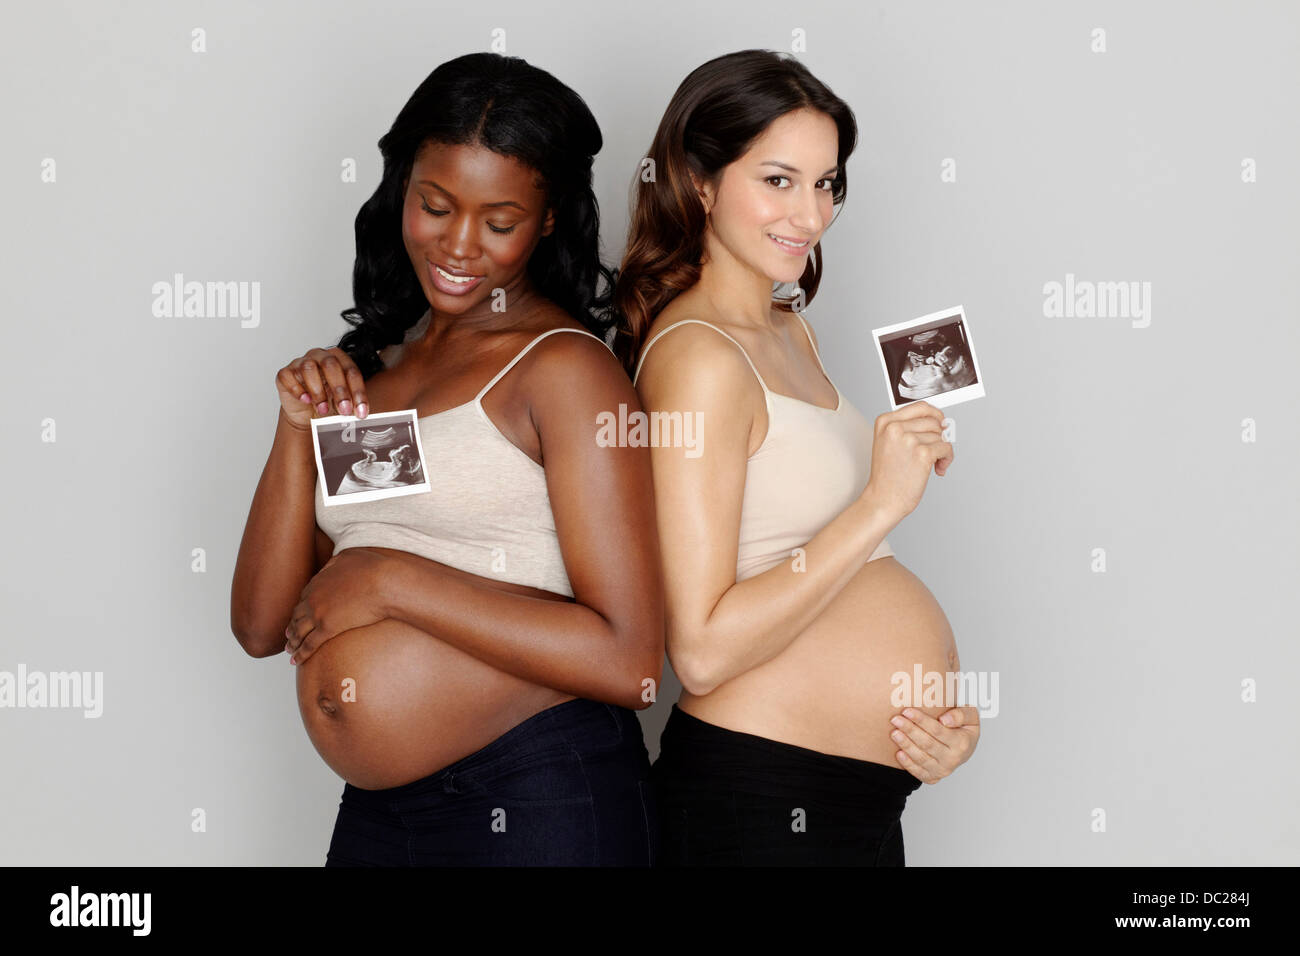 Two pregnant women holding ultrasound scans Stock Photo